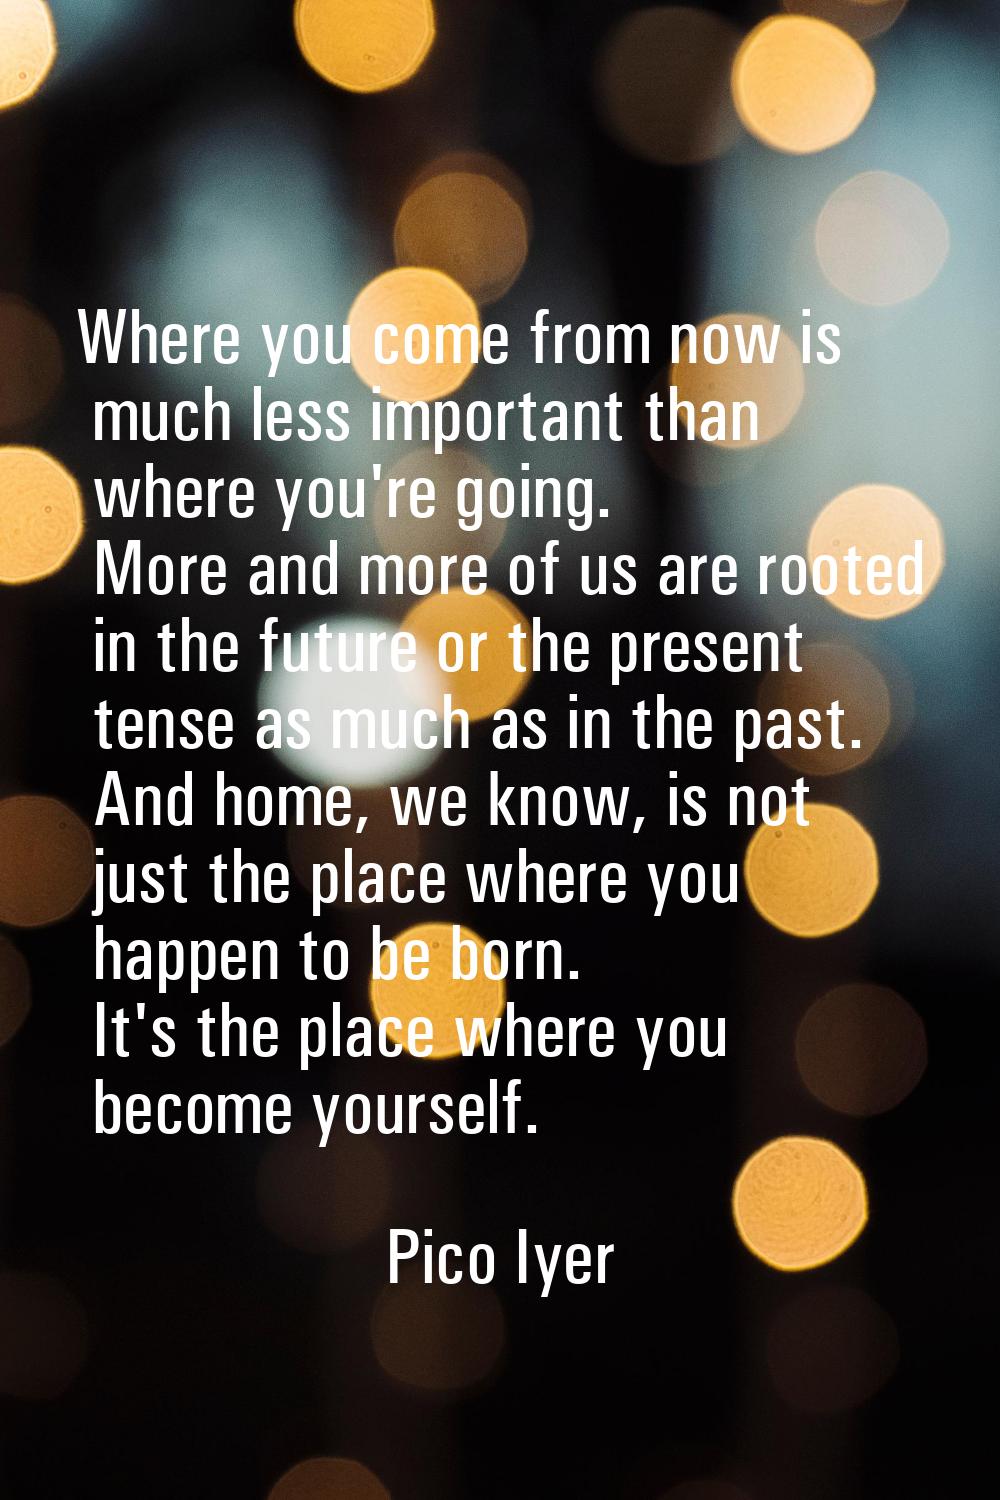 Where you come from now is much less important than where you're going. More and more of us are roo